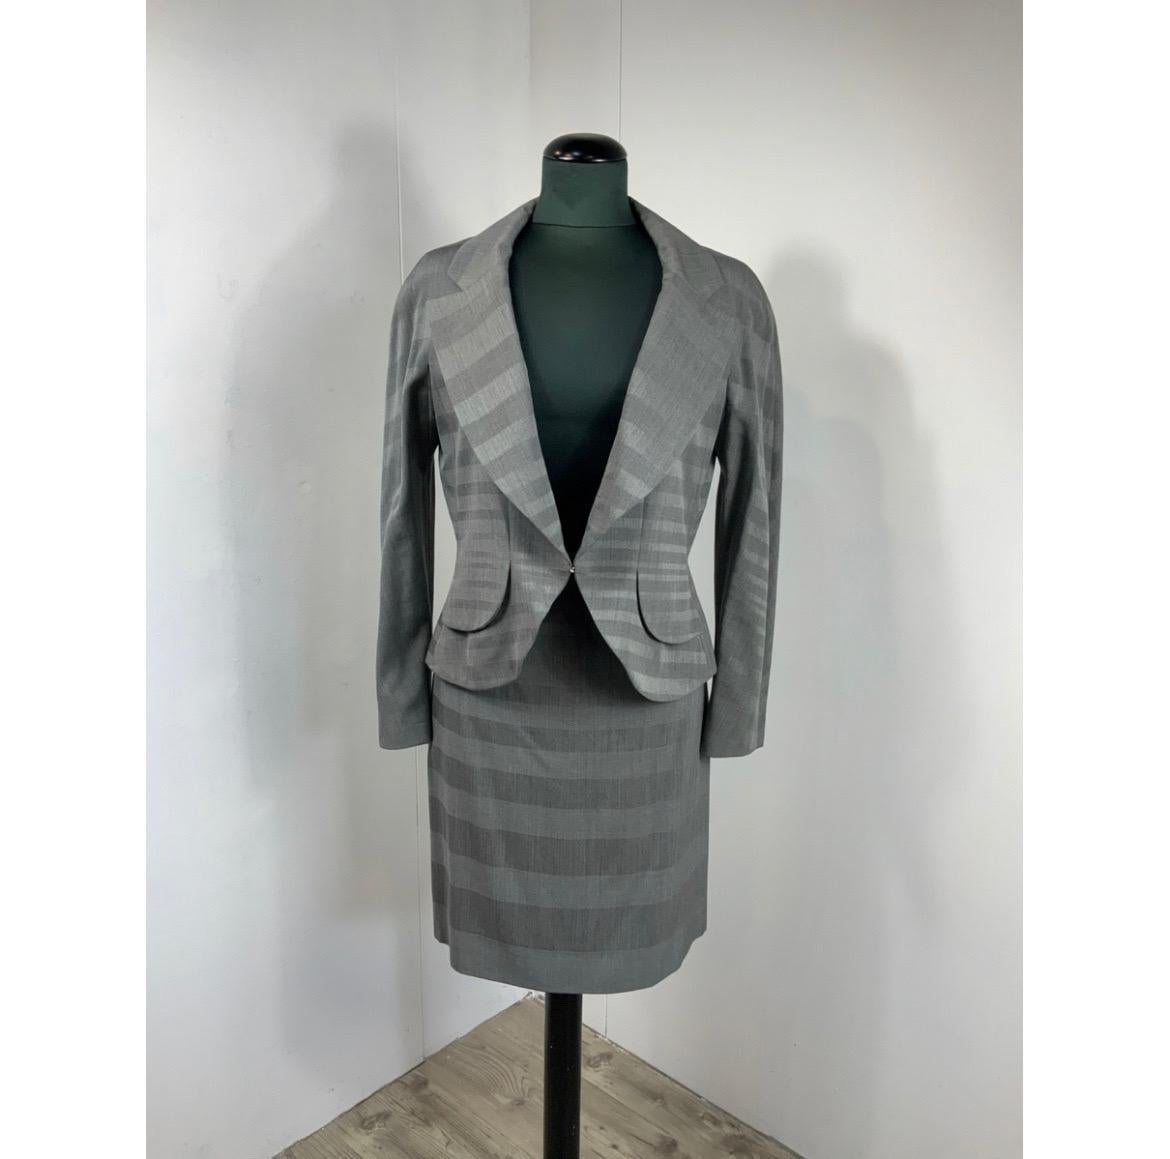 Suit Christian Dior. 90's.
The size and composition label have been cut.
We think it's a wool blend. Lined in silk.
Wearing an Italian 44/46.
The jacket measures
Shoulders 44 cm
Bust 48cm
Length 57 cm
Sleeve 60 cm
The skirt closes with a side